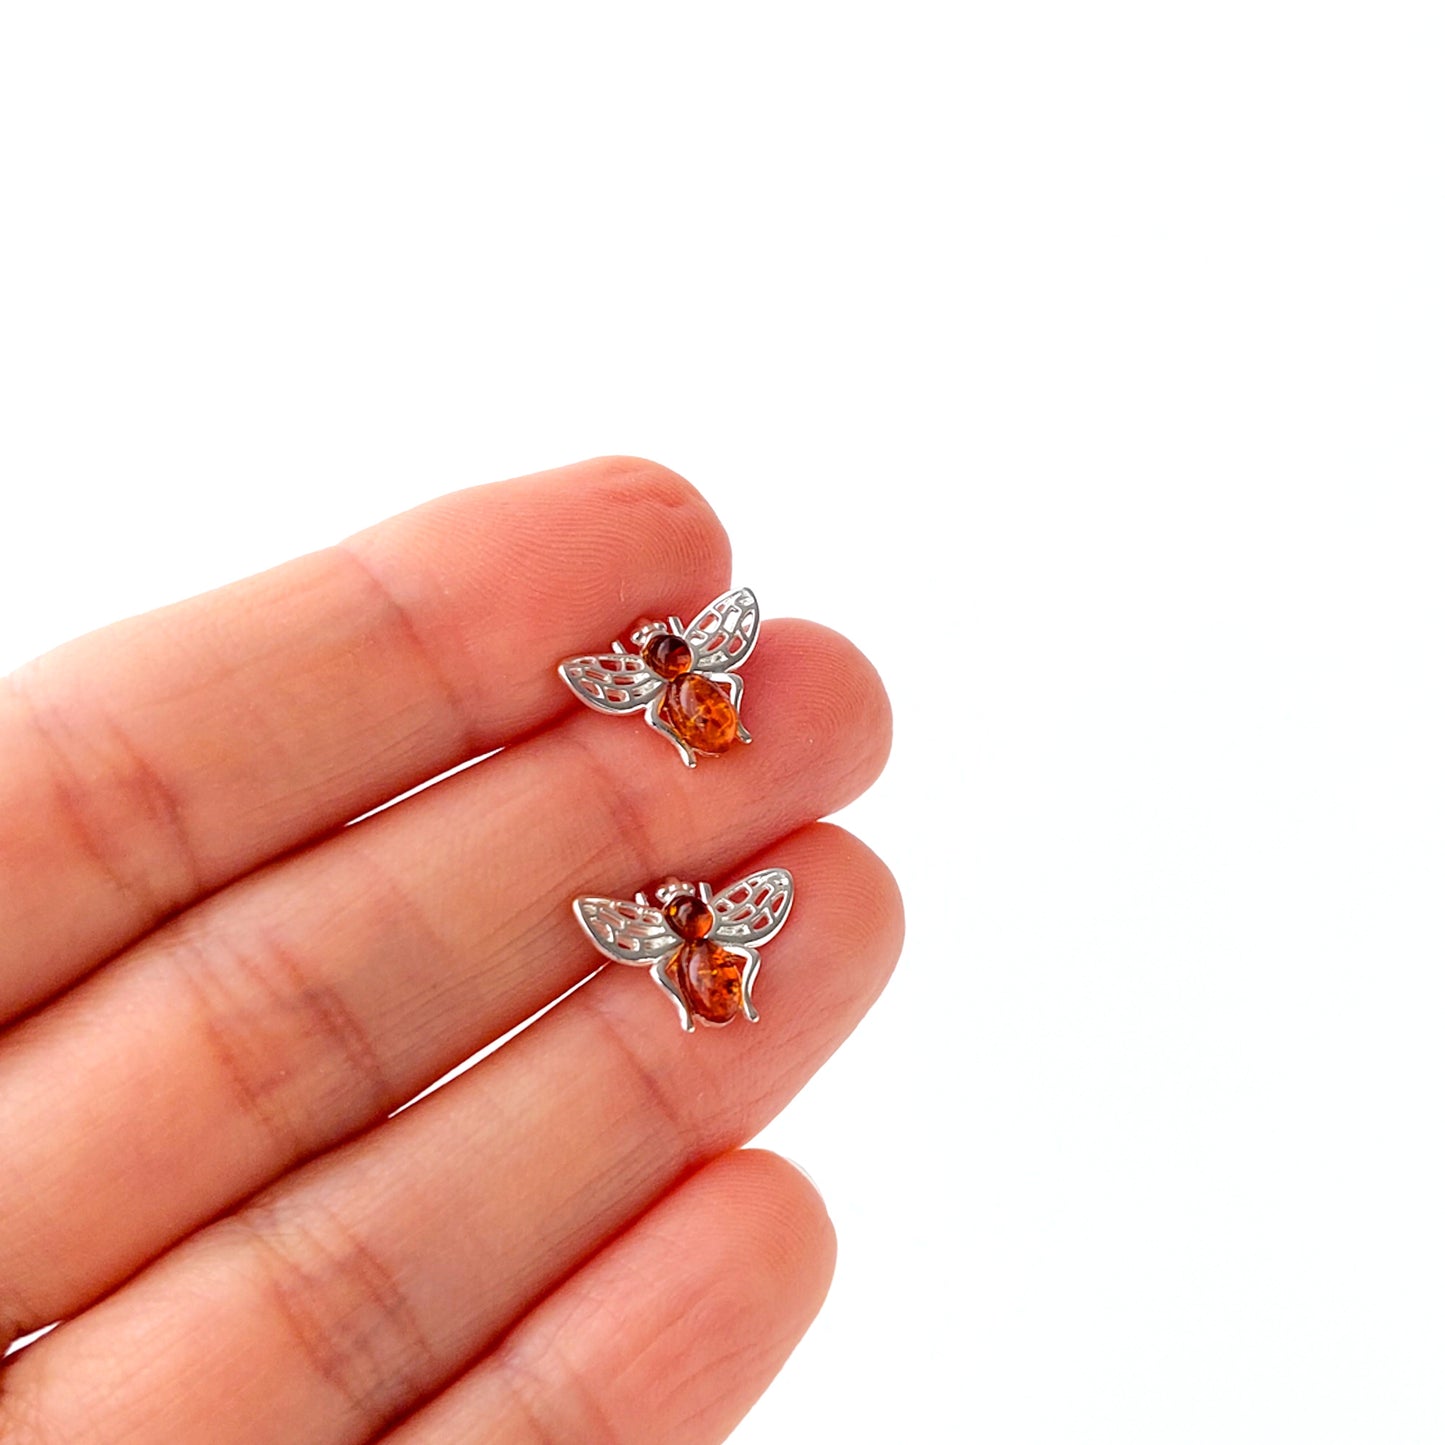 Bee Earrings in Amber, Sterling Silver Bee earrings, Bee Jewelry, Honey Bee Silver Stud earrings, Bee gifts, Amber Jewelry, Bumble Bee, Cute